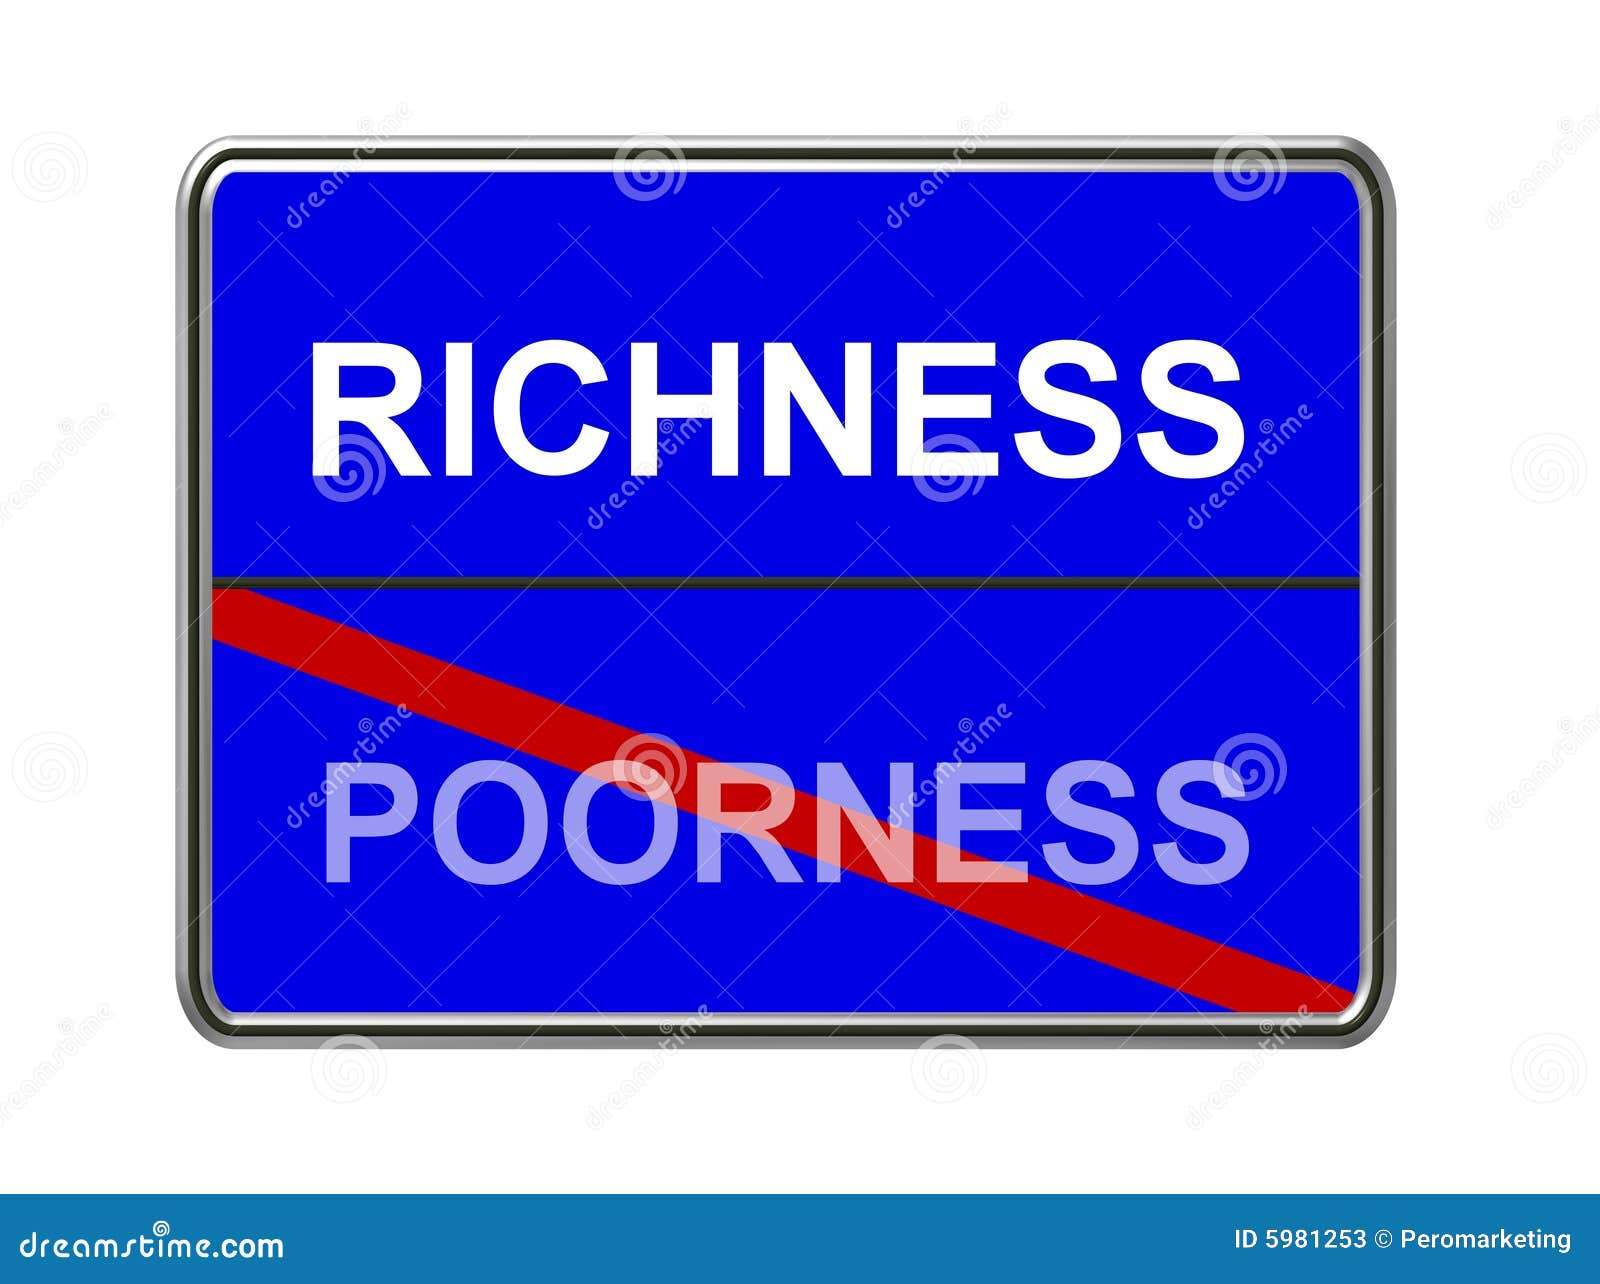 richness and poorness sign